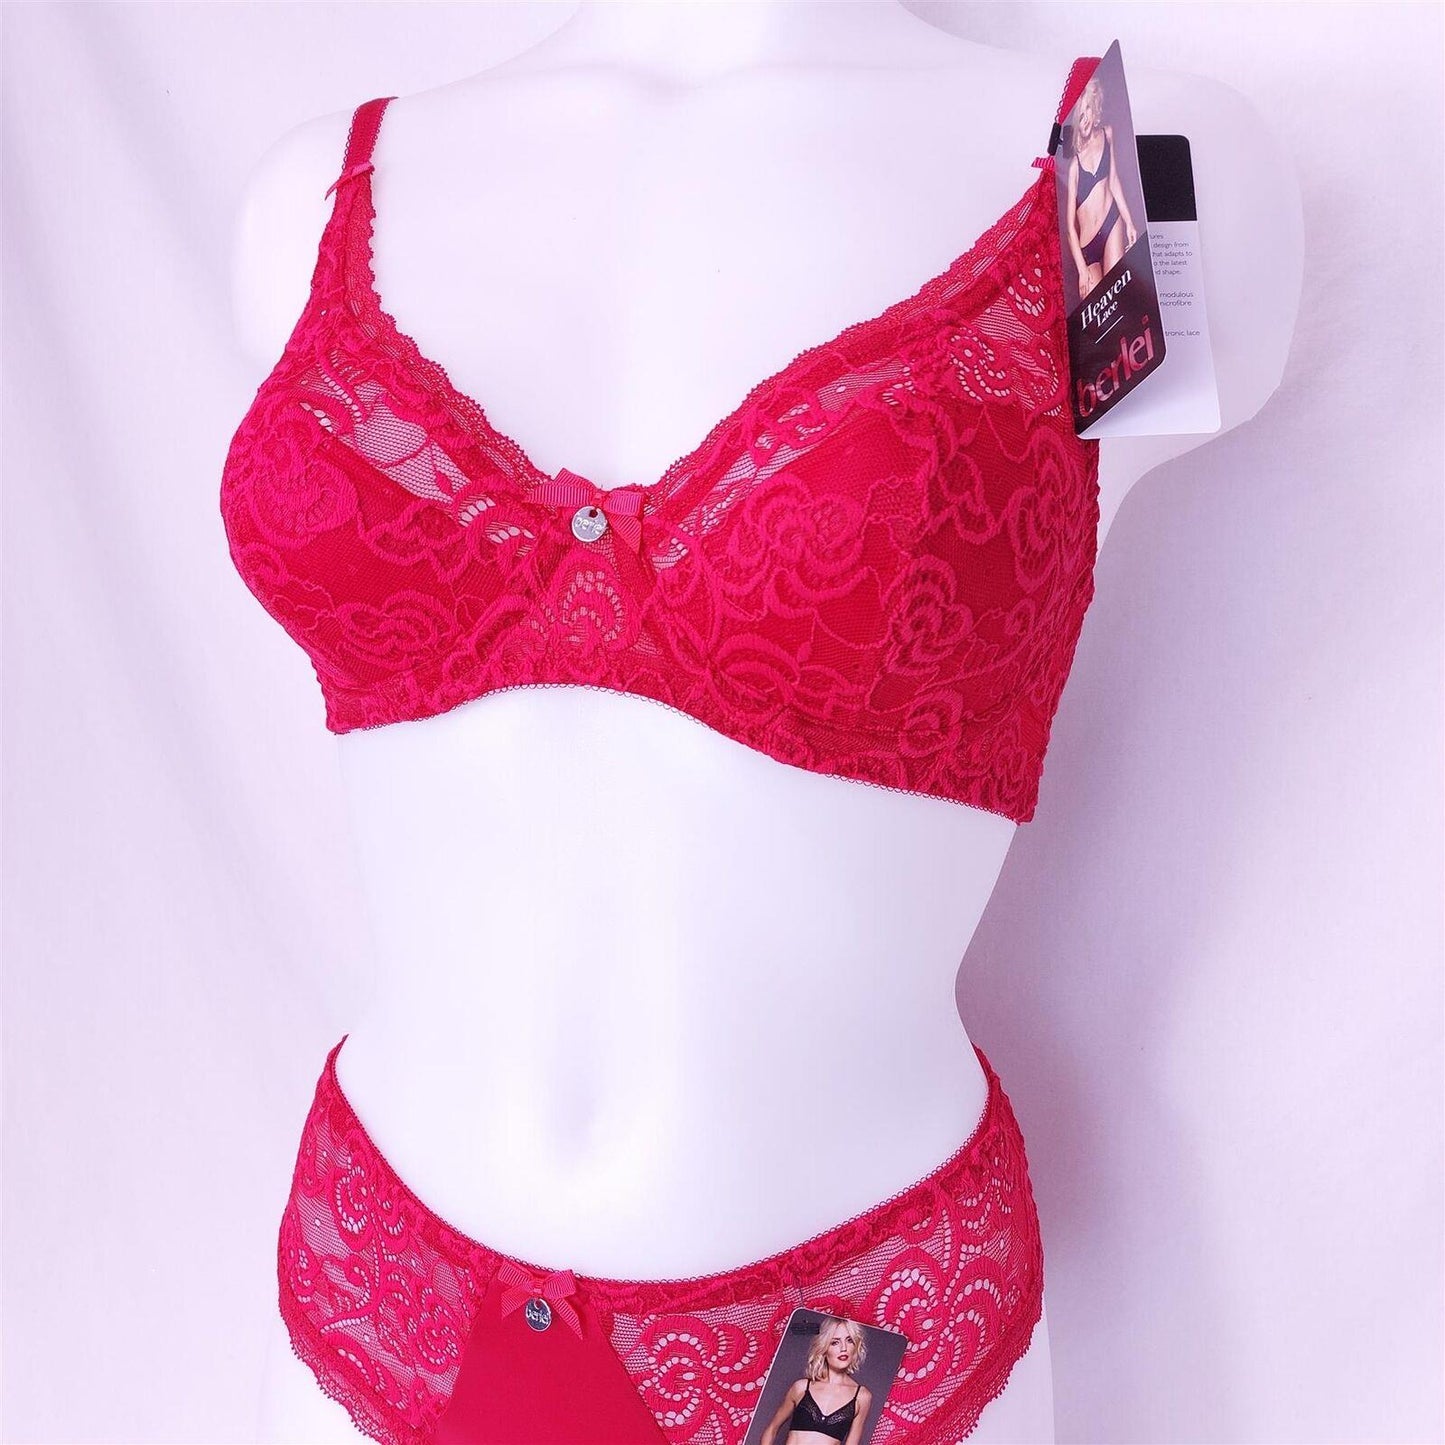 2x Berlei Lace Comfort Bras Underwired Padded Multipack 32B-34D Red or White New